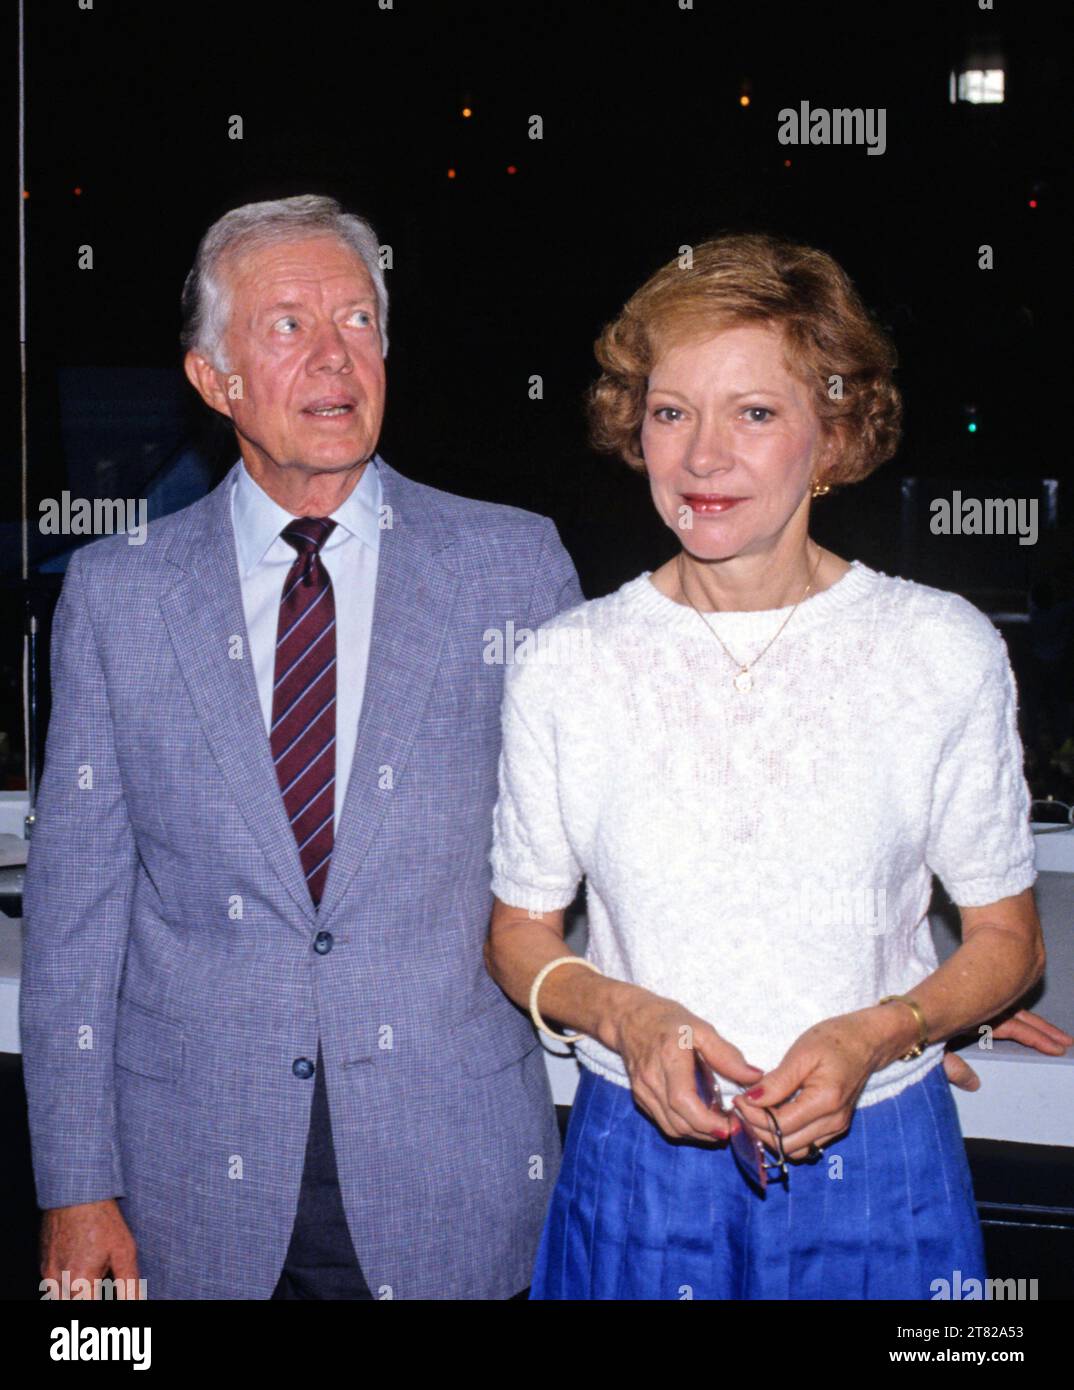 Former United States President Jimmy Carter, accompanied by his wife, former first lady Rosalynn Carter, visits the Omni Coliseum in Atlanta, Georgia prior to his addressing the 1988 Democratic National Convention on July 18, 1988. Copyright: x 1988xArniexSachsxxxConsolidatedxNewsxPhotosxxxAllxRightsxReservedx Credit: Imago/Alamy Live News Stock Photo